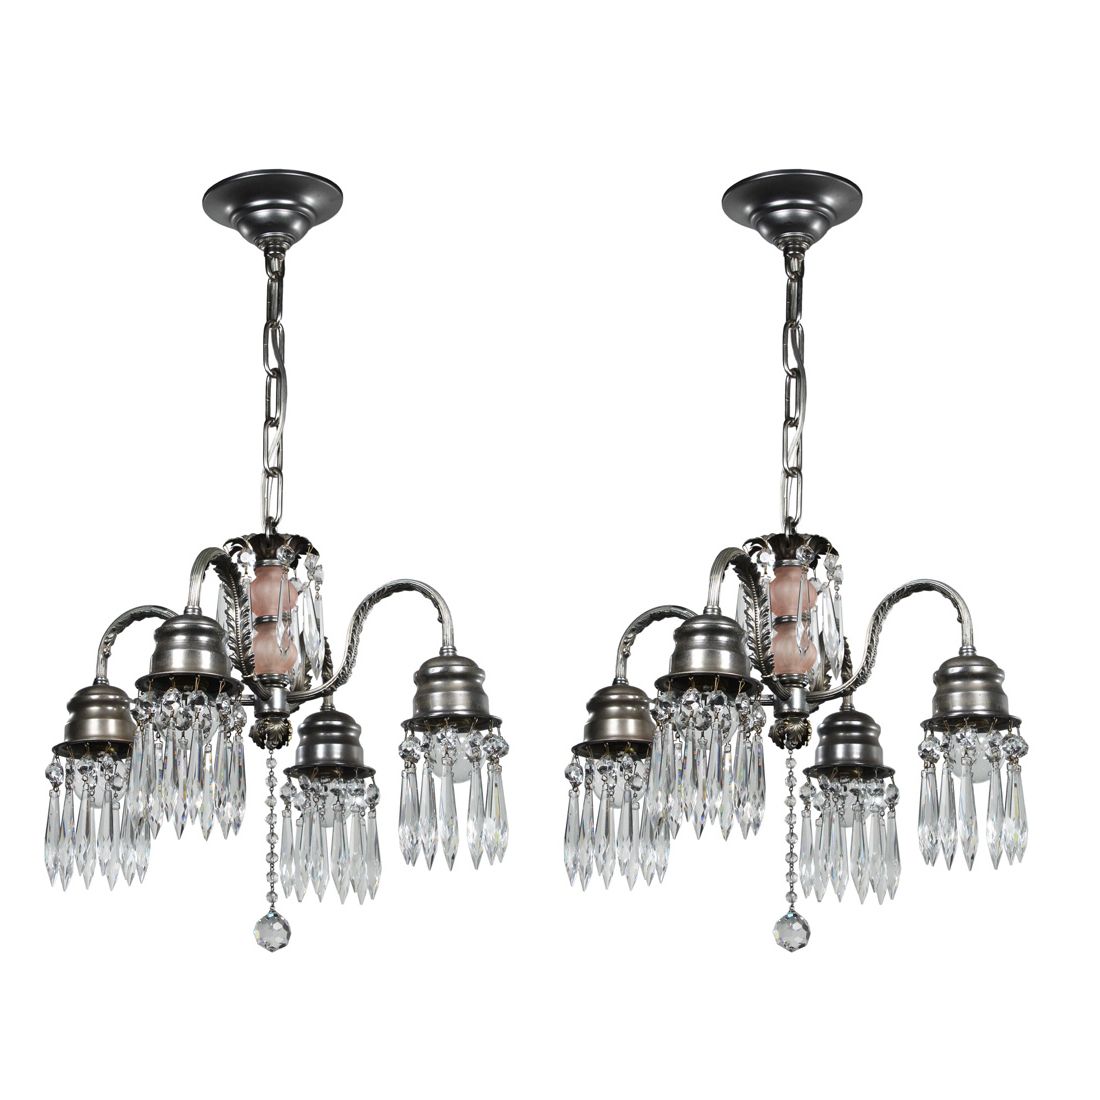 Fashionable Four Light Antique Silver Chandeliers Pertaining To Sold Matching Antique Four Light Chandeliers With Prisms (View 6 of 20)